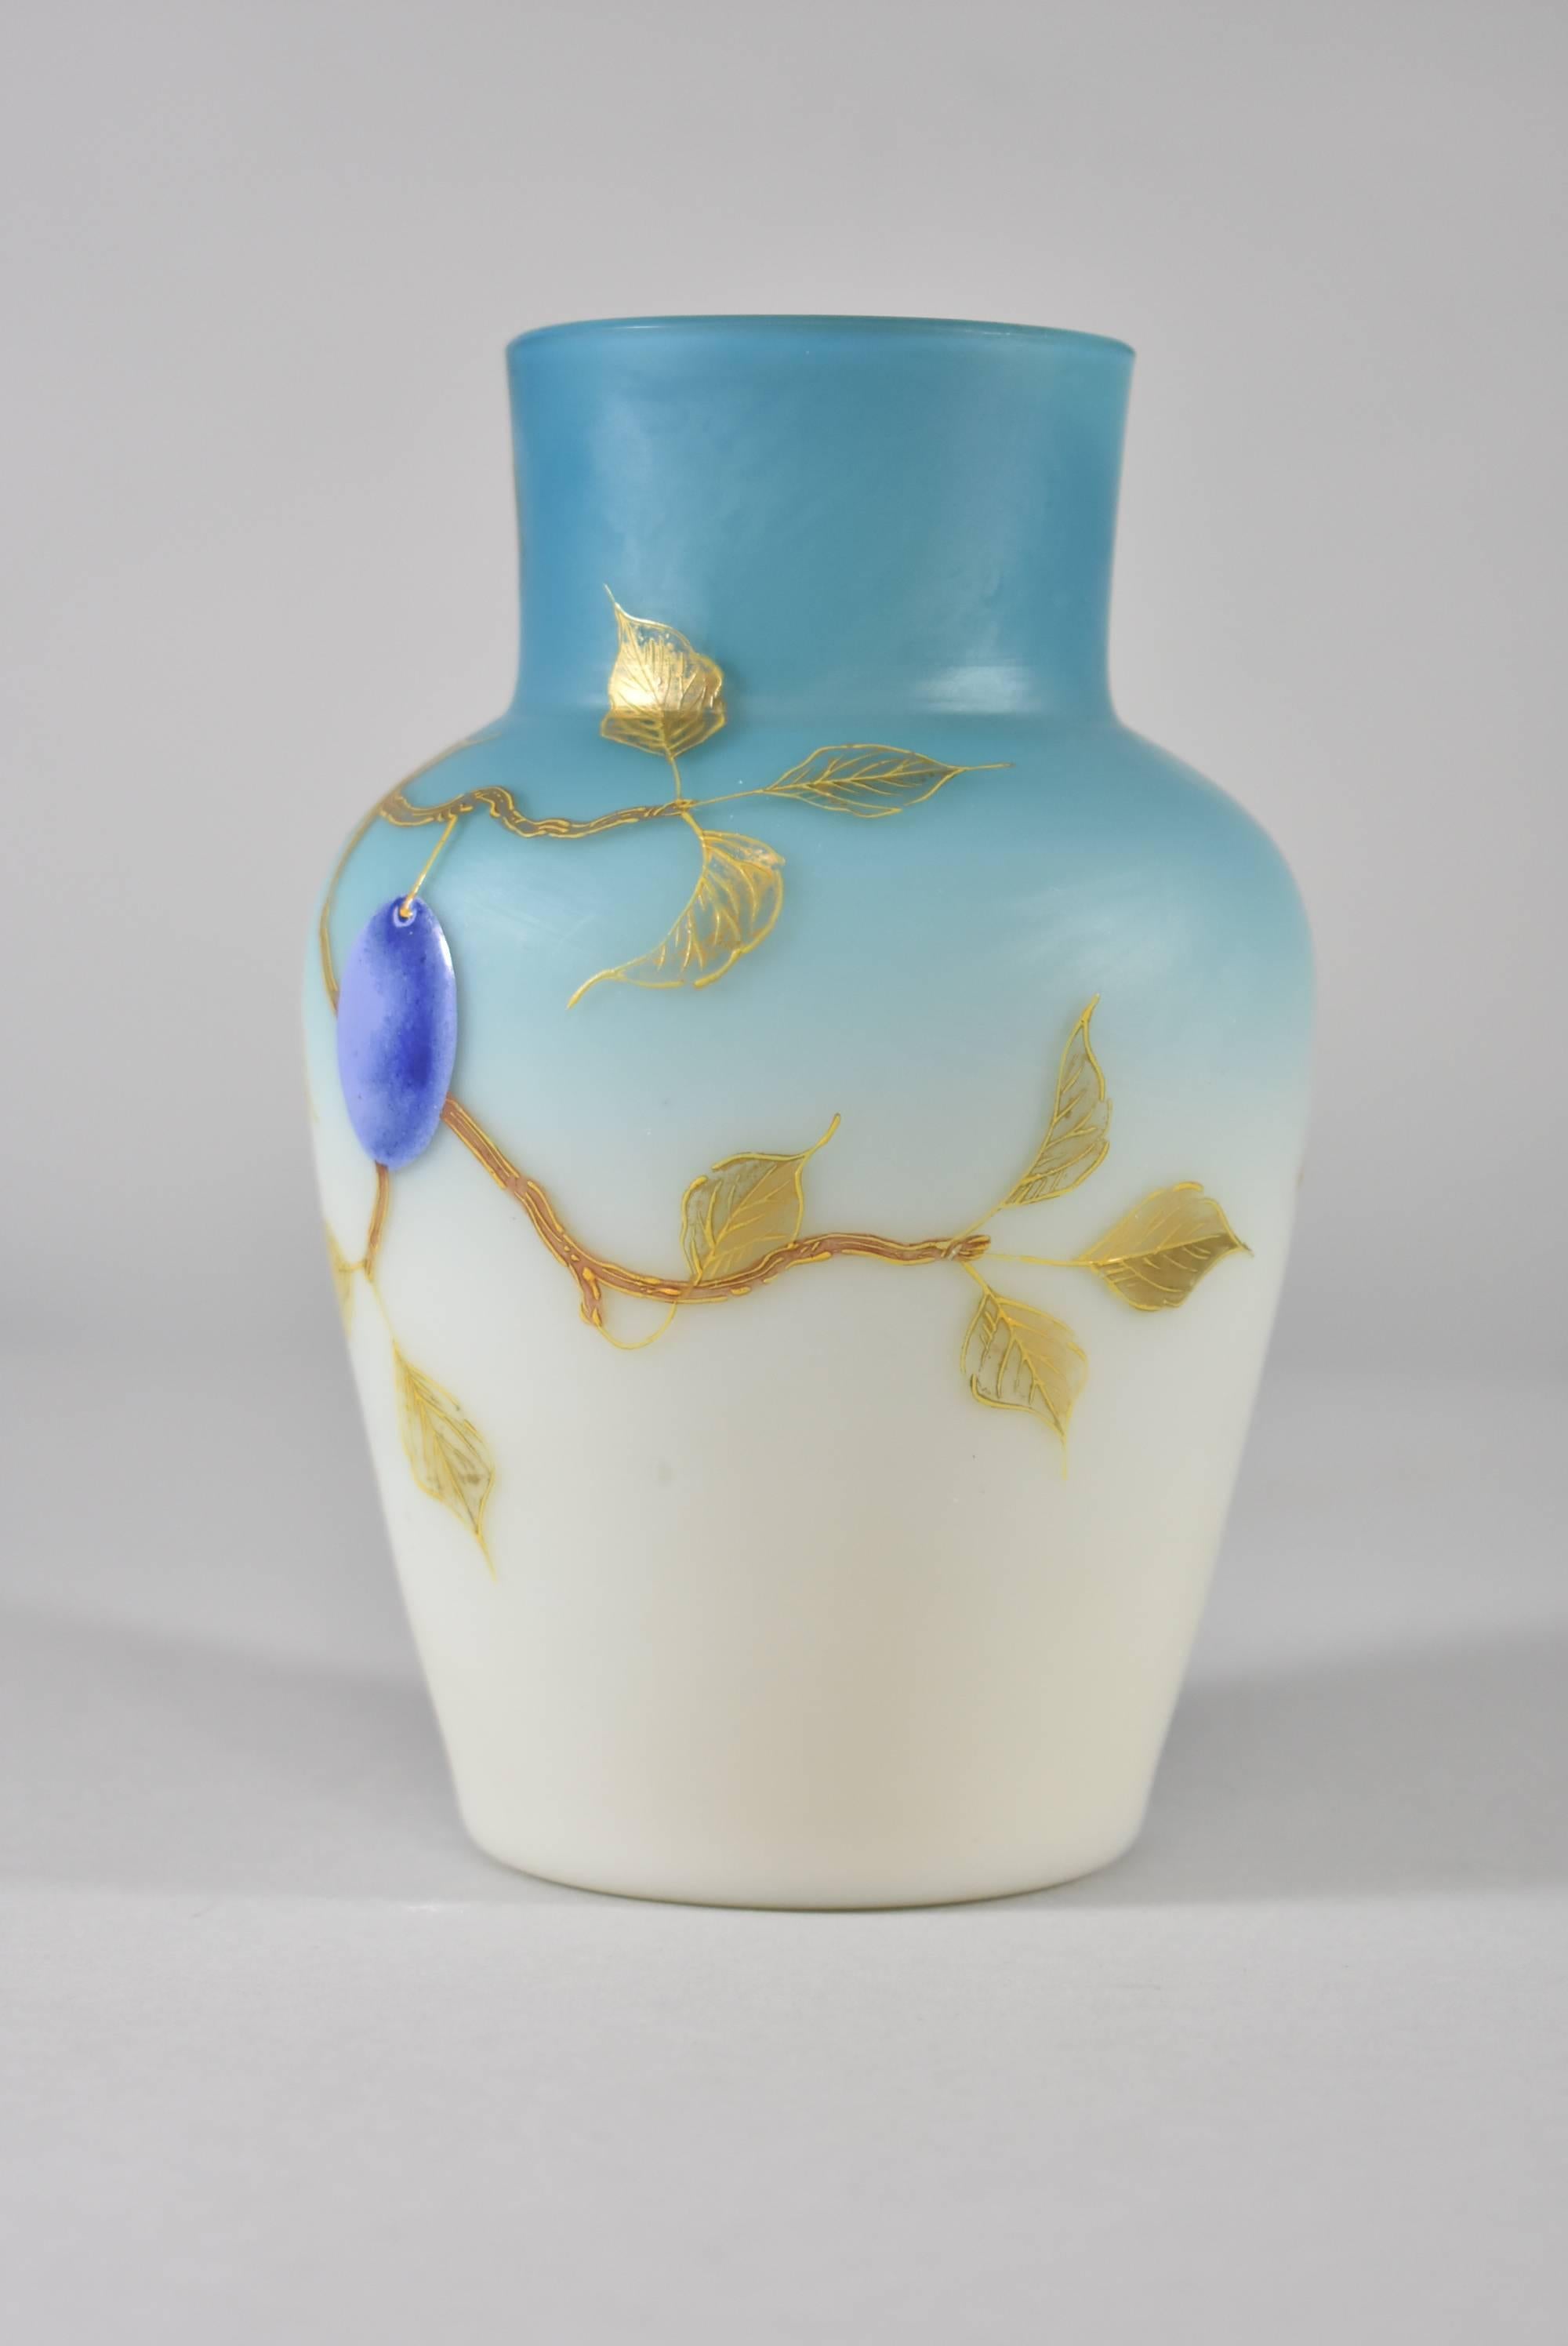 A beautiful pair of vases by Thomas Webb. These hand-painted vases features plumbs, foliage and branches against a soft blue/white satin background. They are marked on the bottom 676/7, W124 & 5. They are 6" T x 4" in diameter that